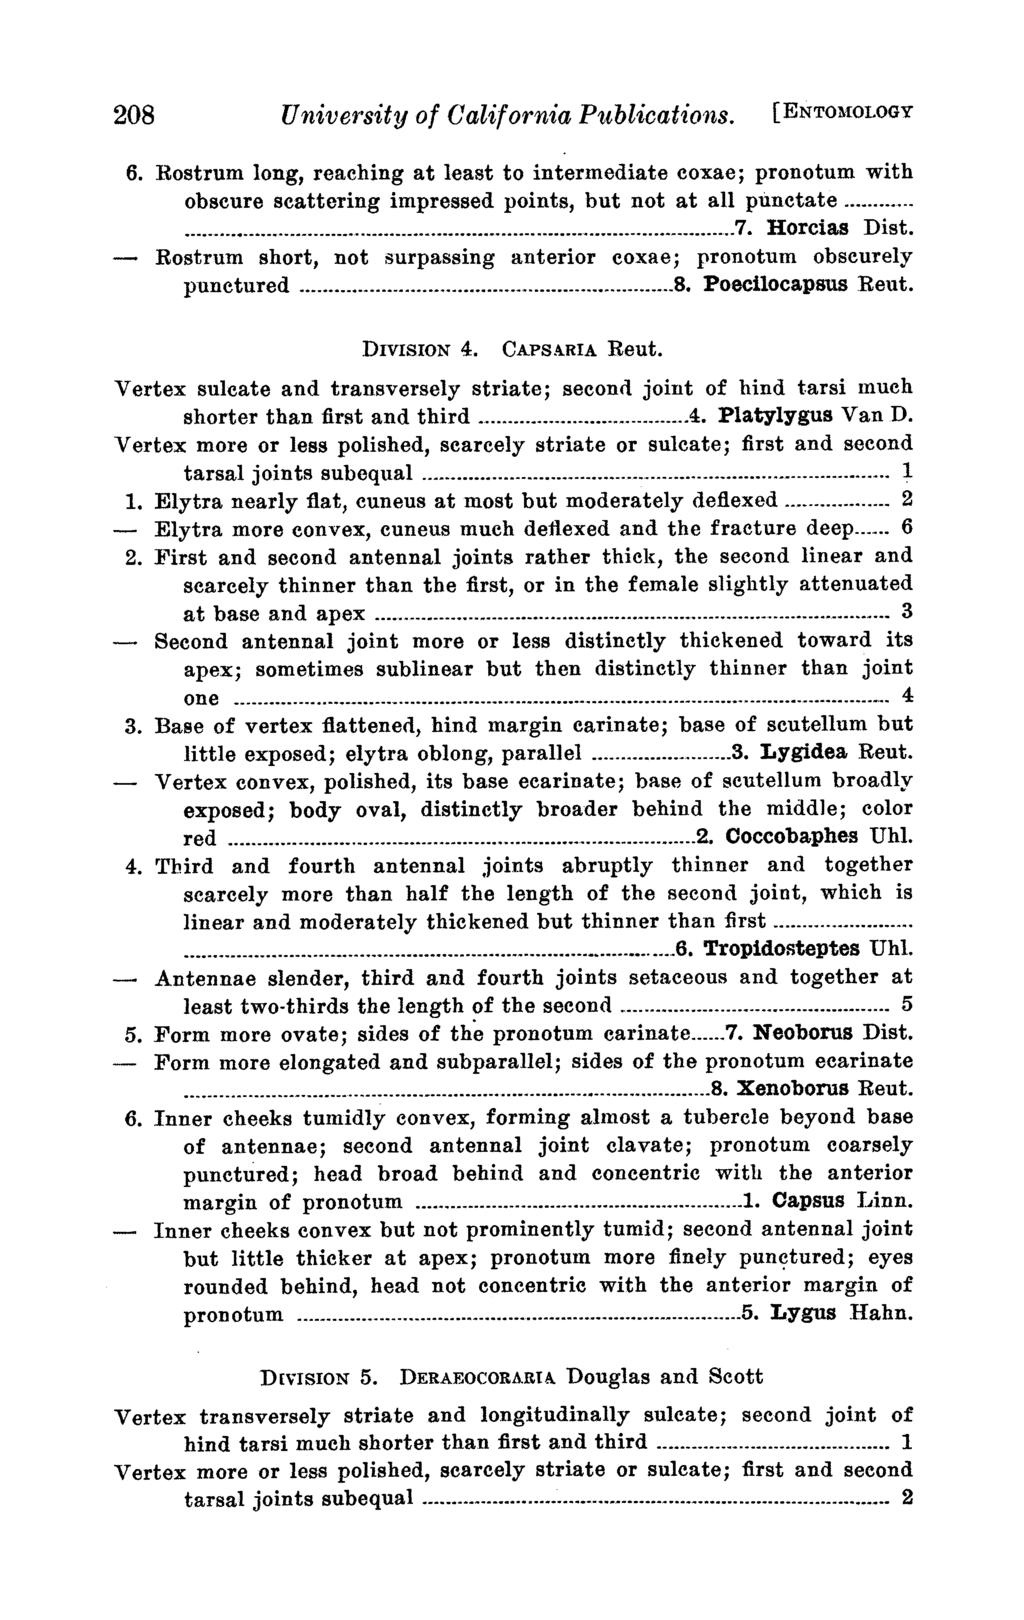 208 University of California Publications. [ENTOMOLOGY 6. Rostrum long, reaching at least to intermediate coxae; pronotum with obscure scattering impressed points, but not at all punctate.